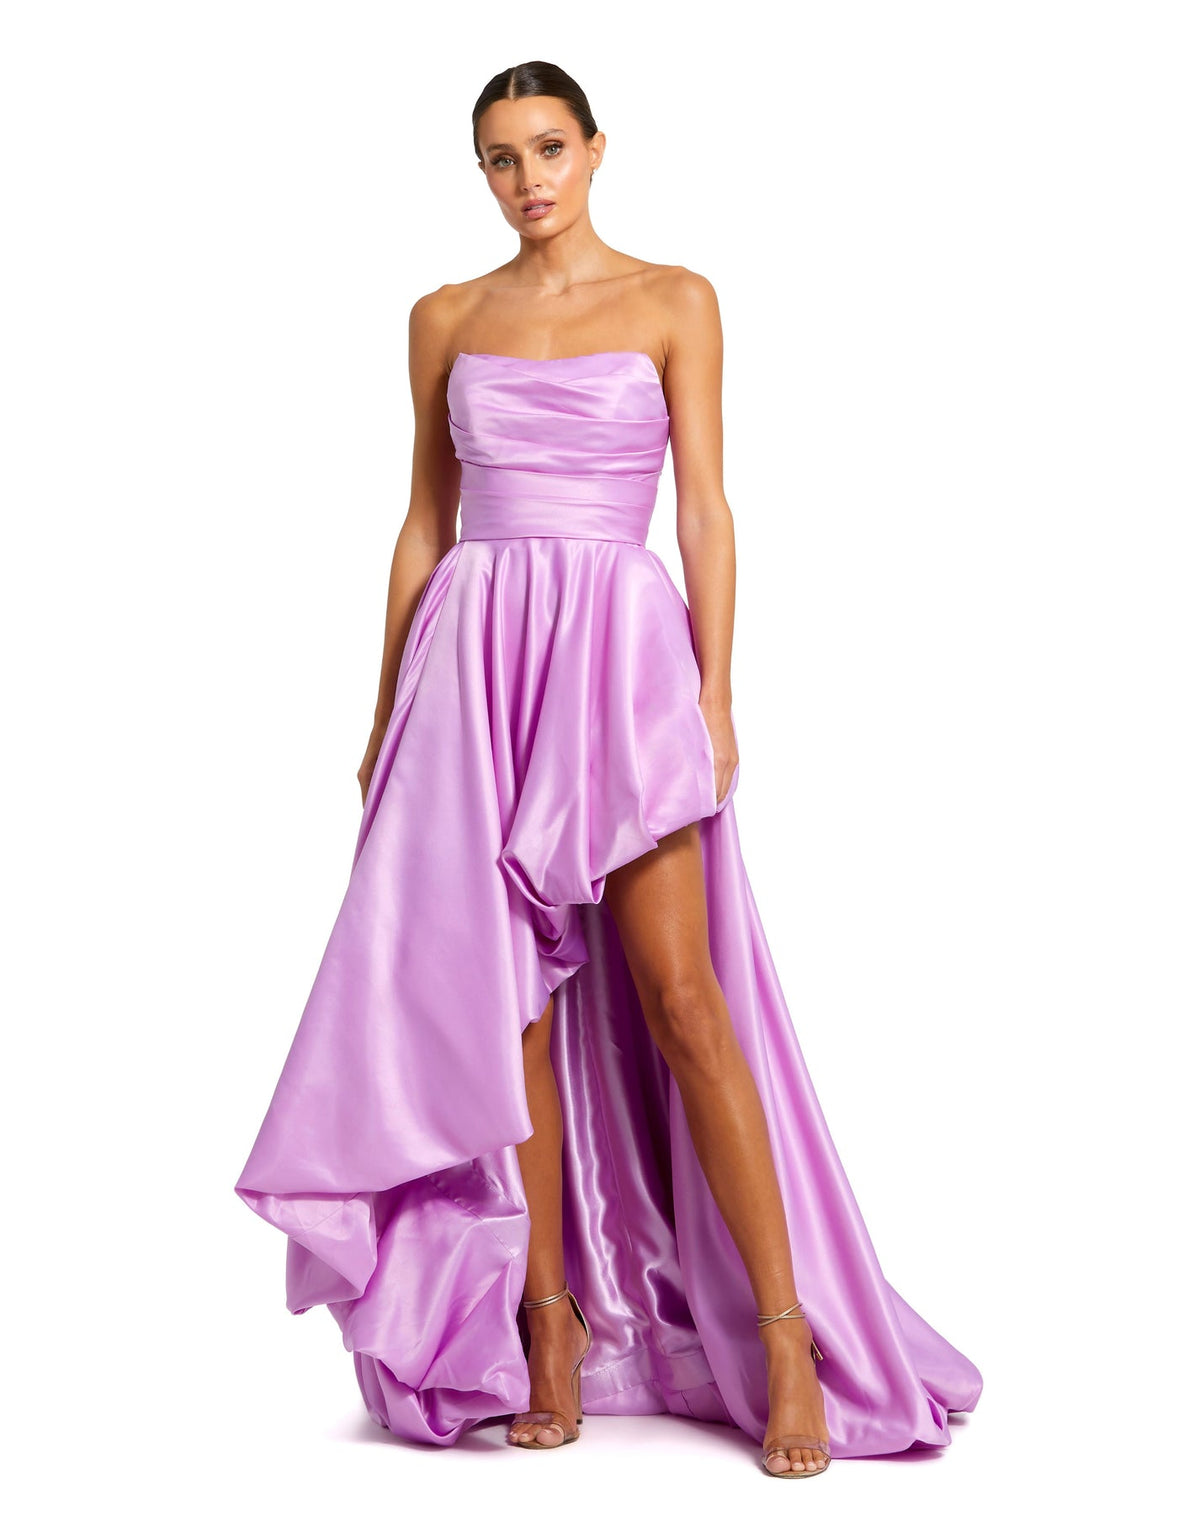 mac duggal dress, wedding guest dress, prom dress, Style #11685, strapless ruched high low gown, purple